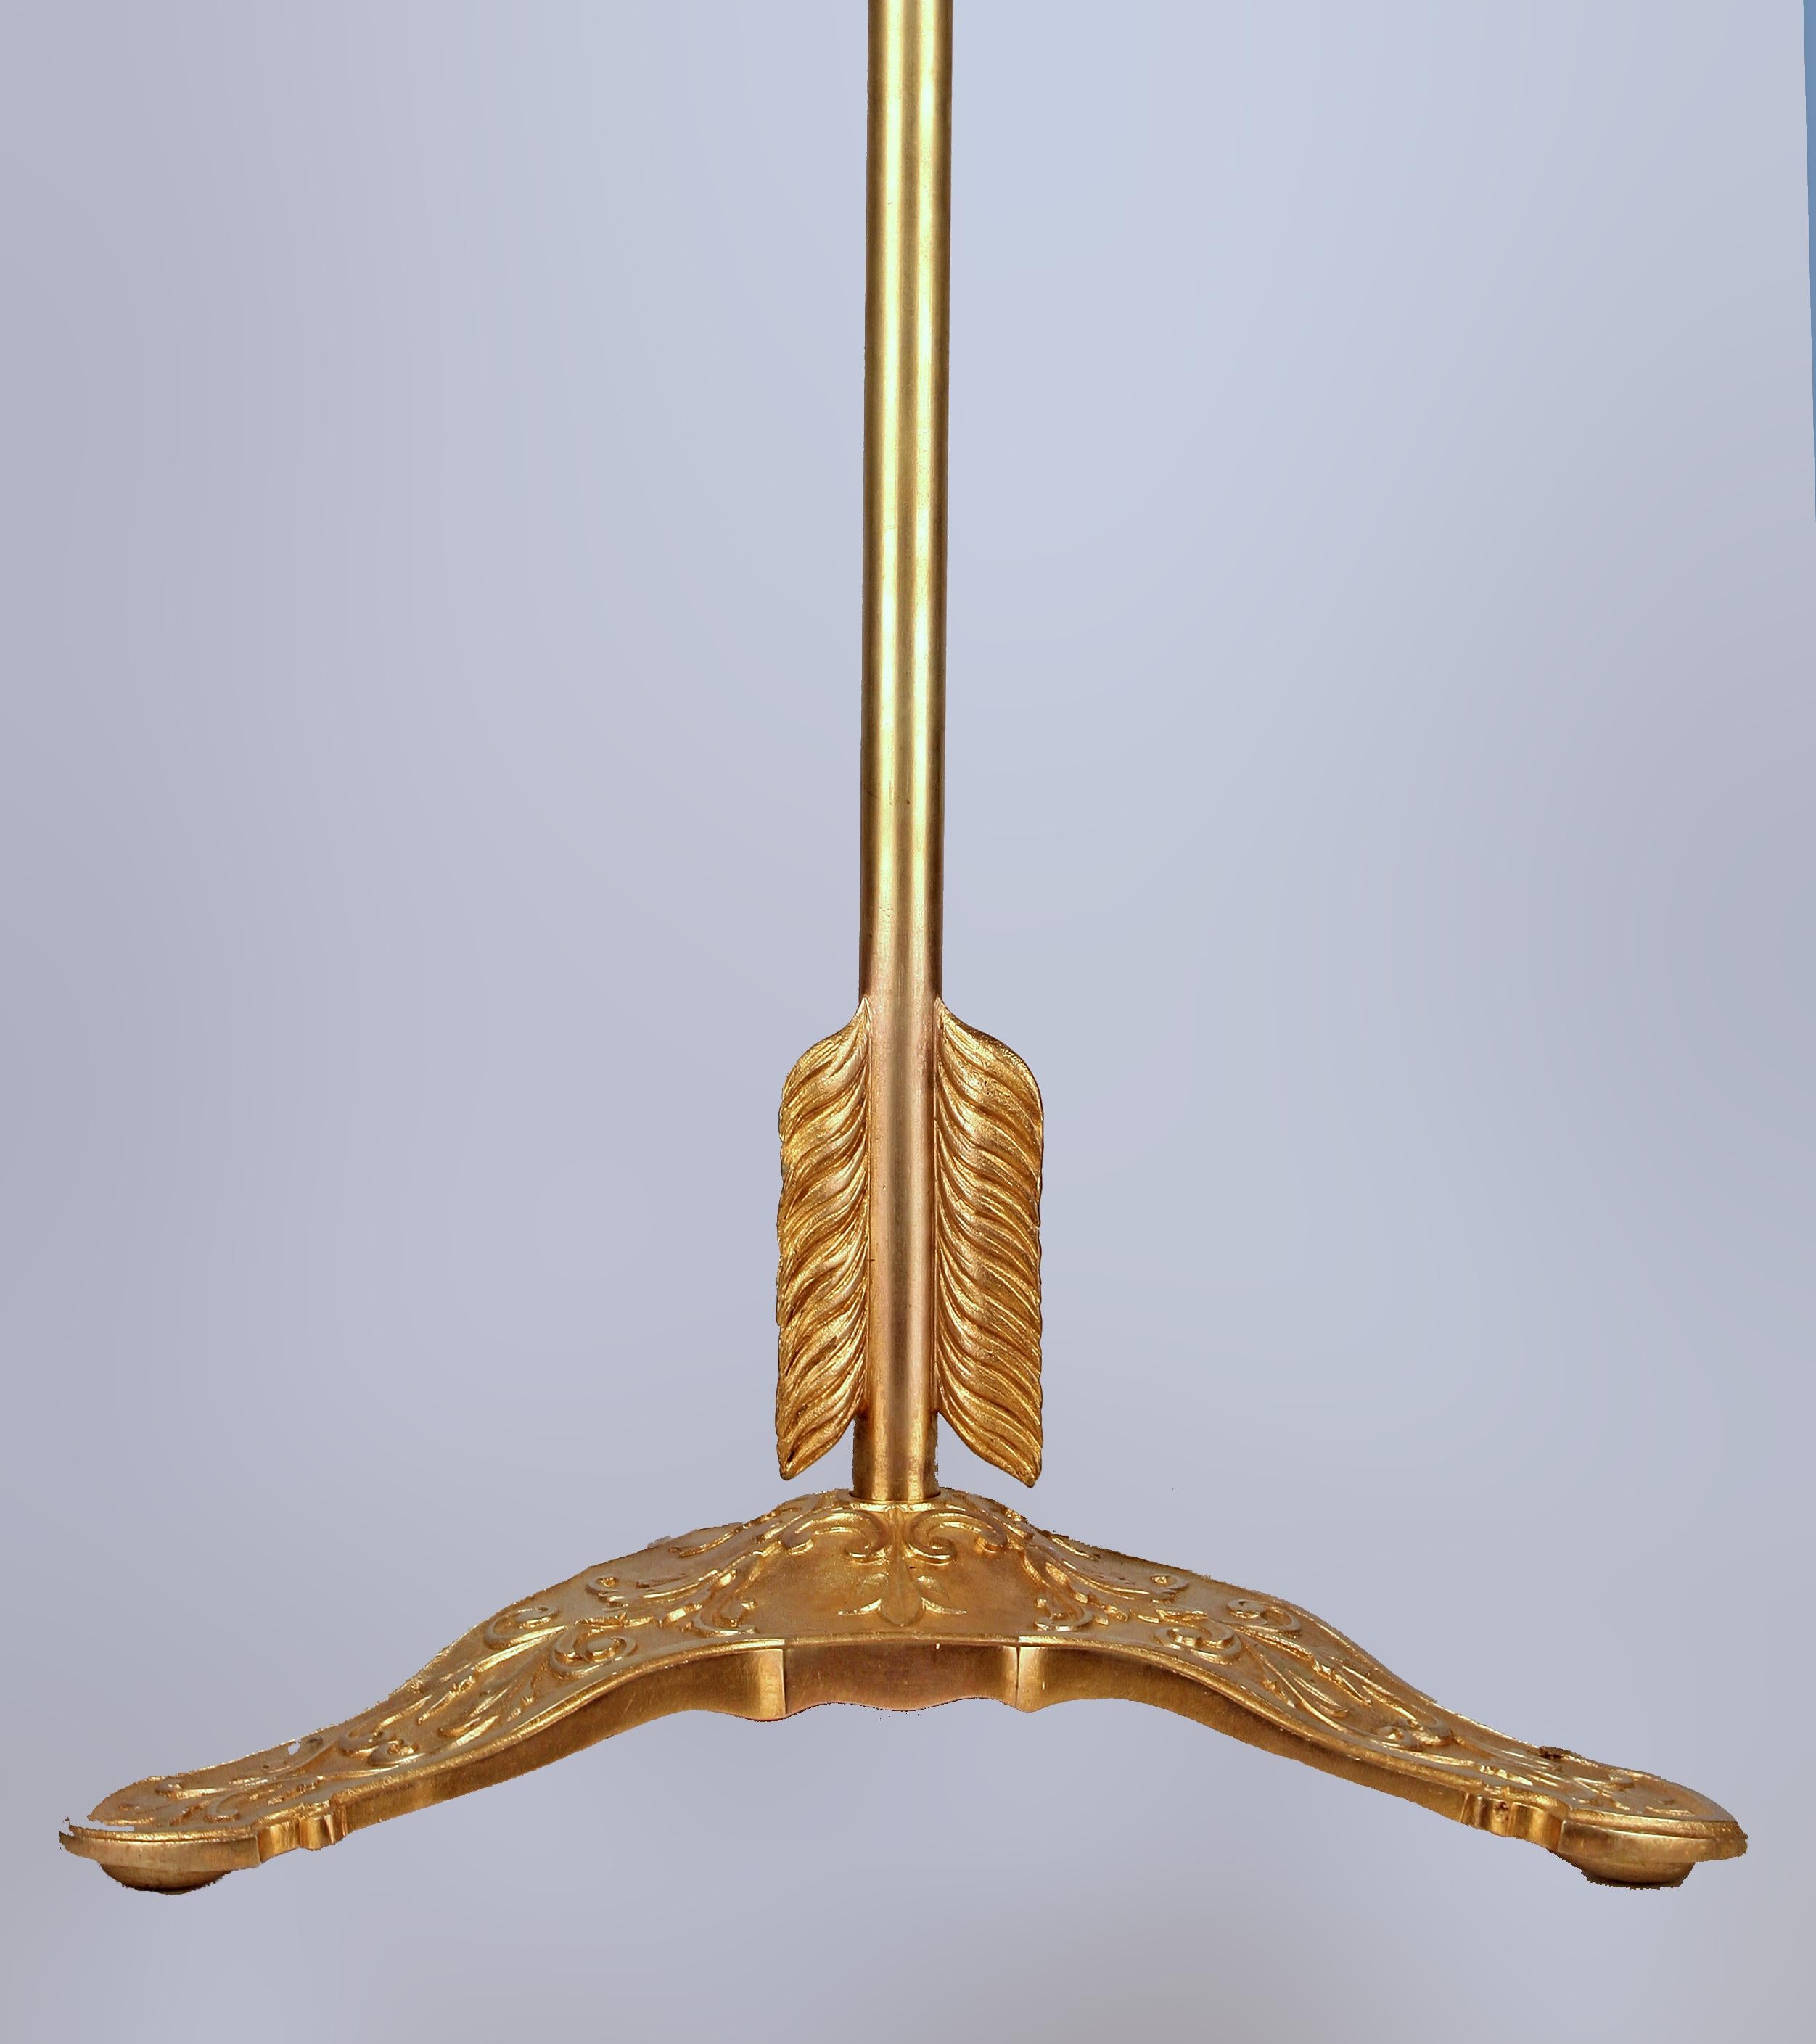 Late 19th C. French Ormolu/Gilt Bronze Arrow-Shaped Floor Lamp by Maison Jansen In Good Condition For Sale In North Miami, FL